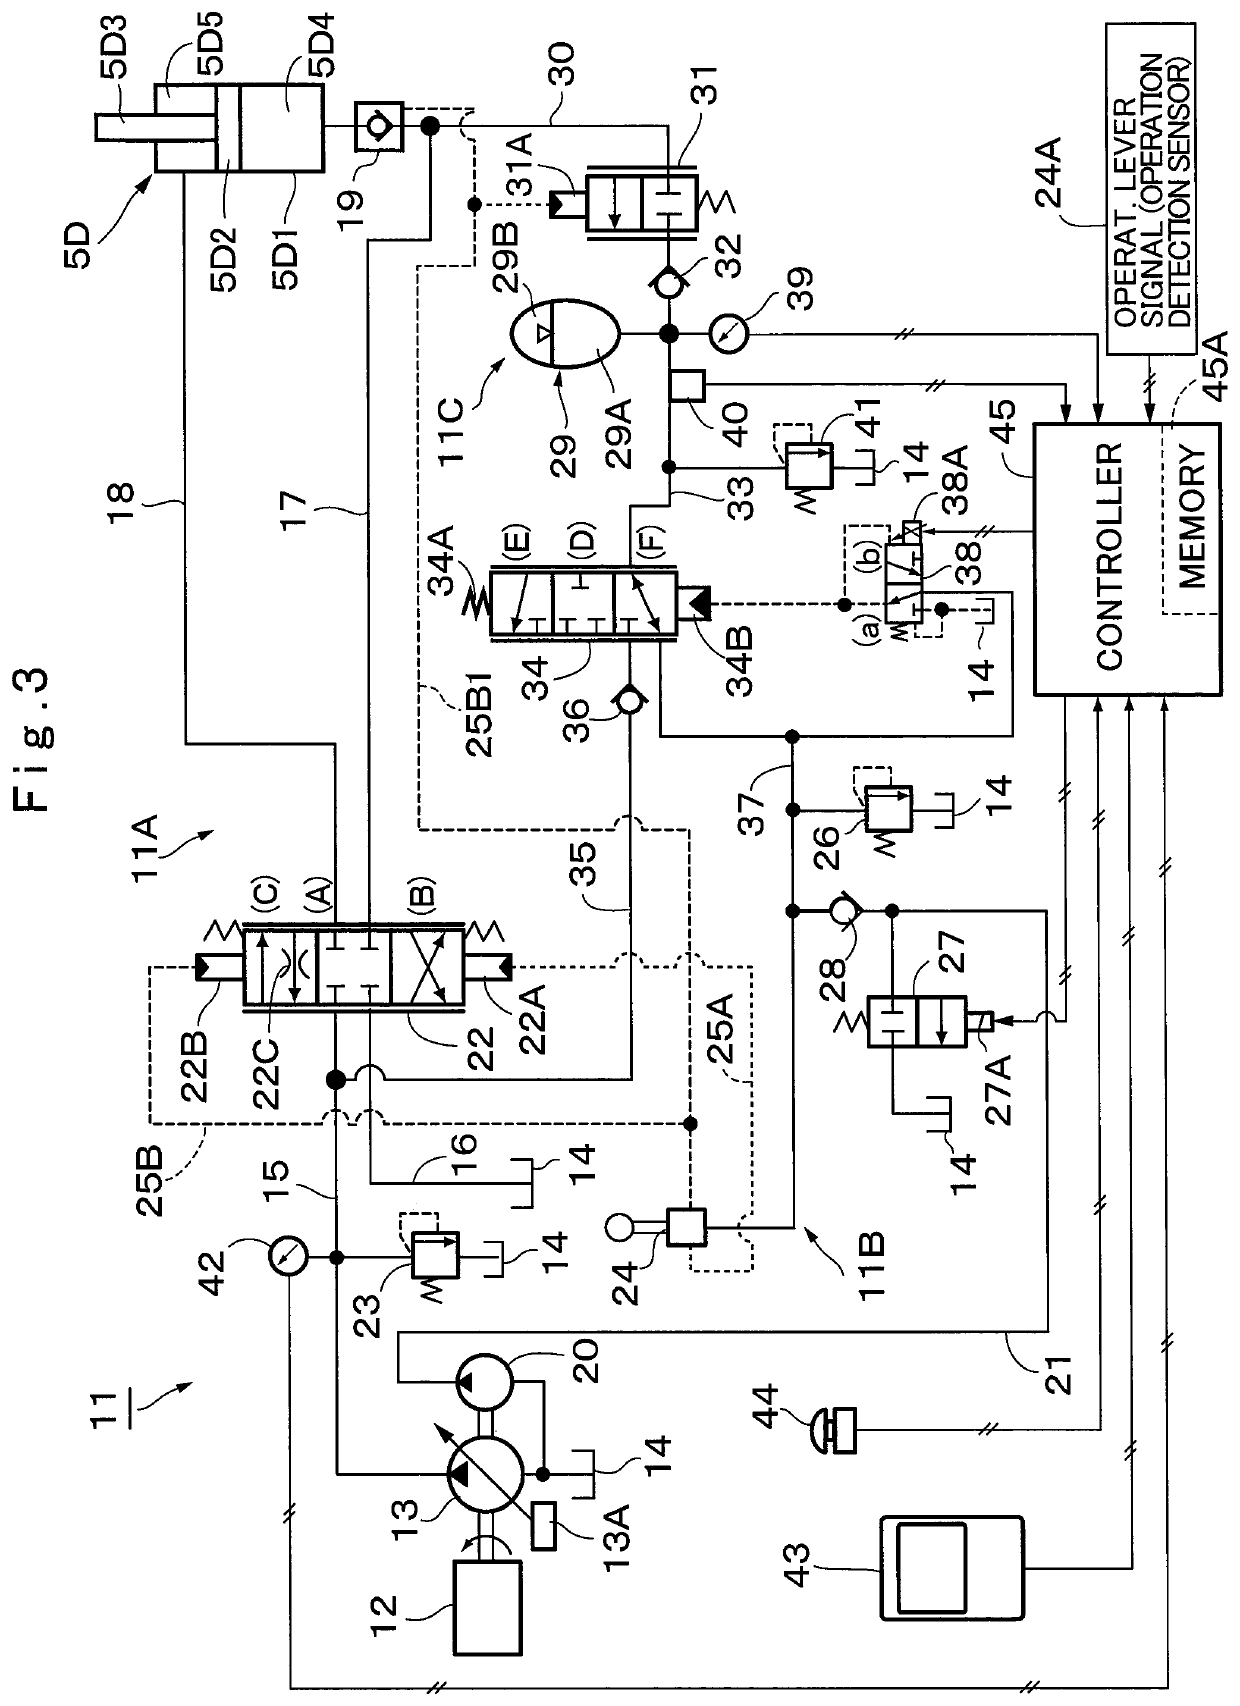 Hydraulic energy recovery apparatus for working machine